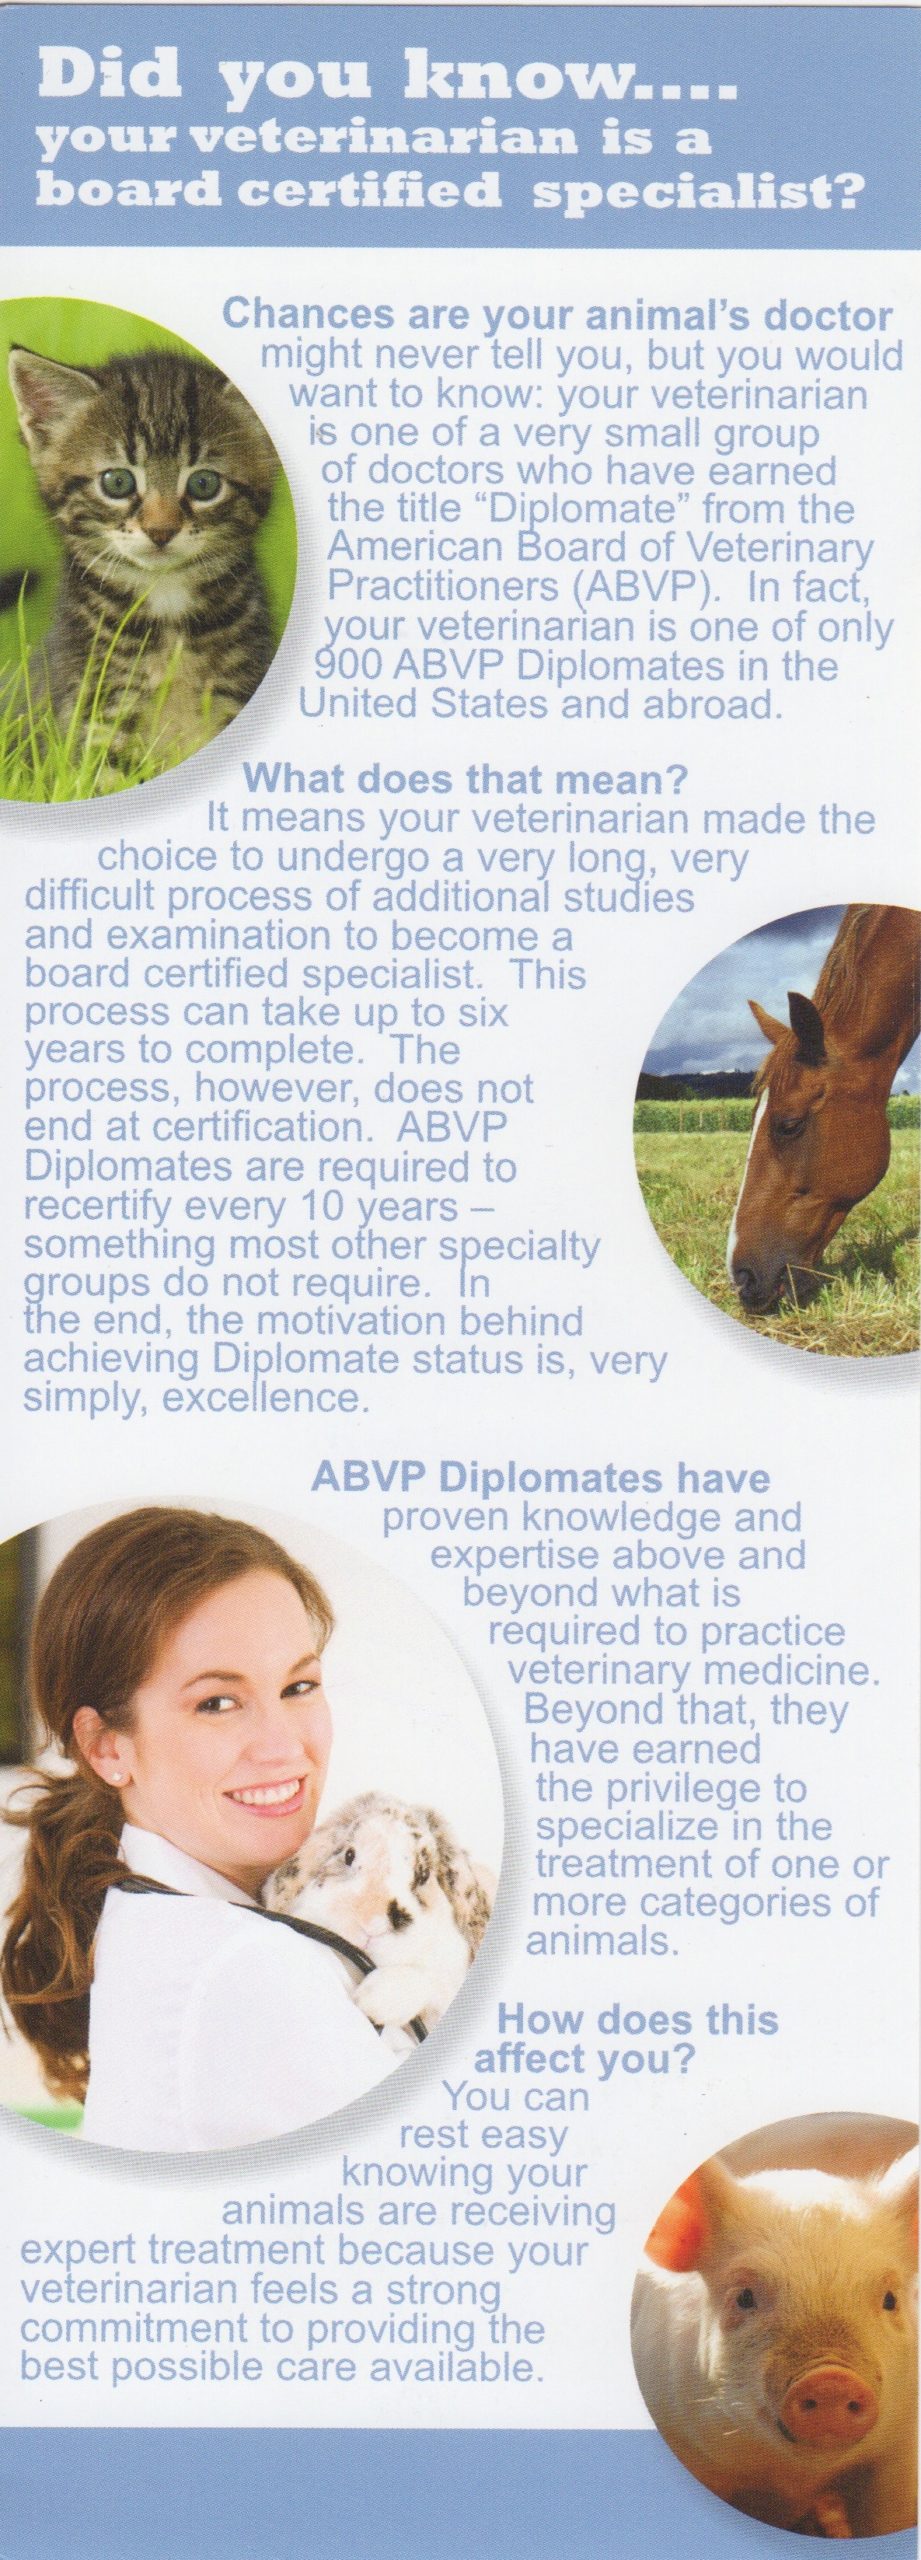 AAHA information with Did you know...your veterinarian is a board certified specialist text